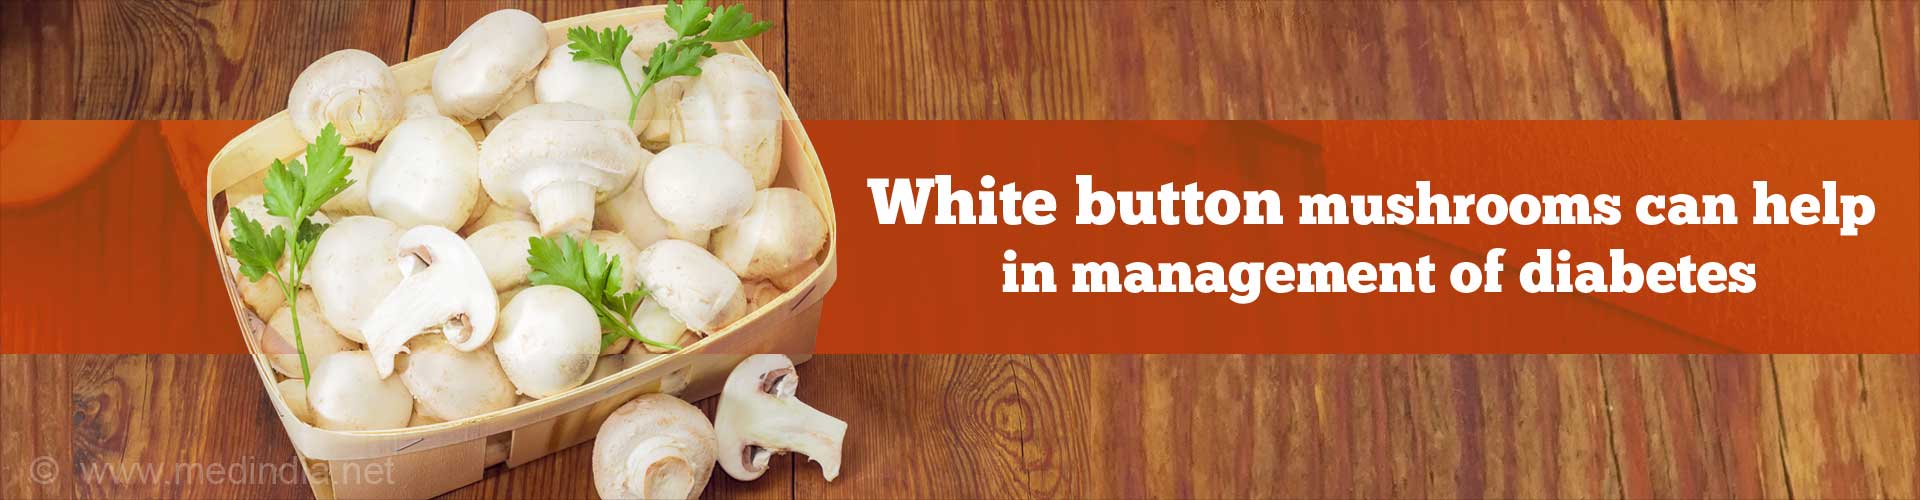 White button mushrooms can help in management of diabetes.